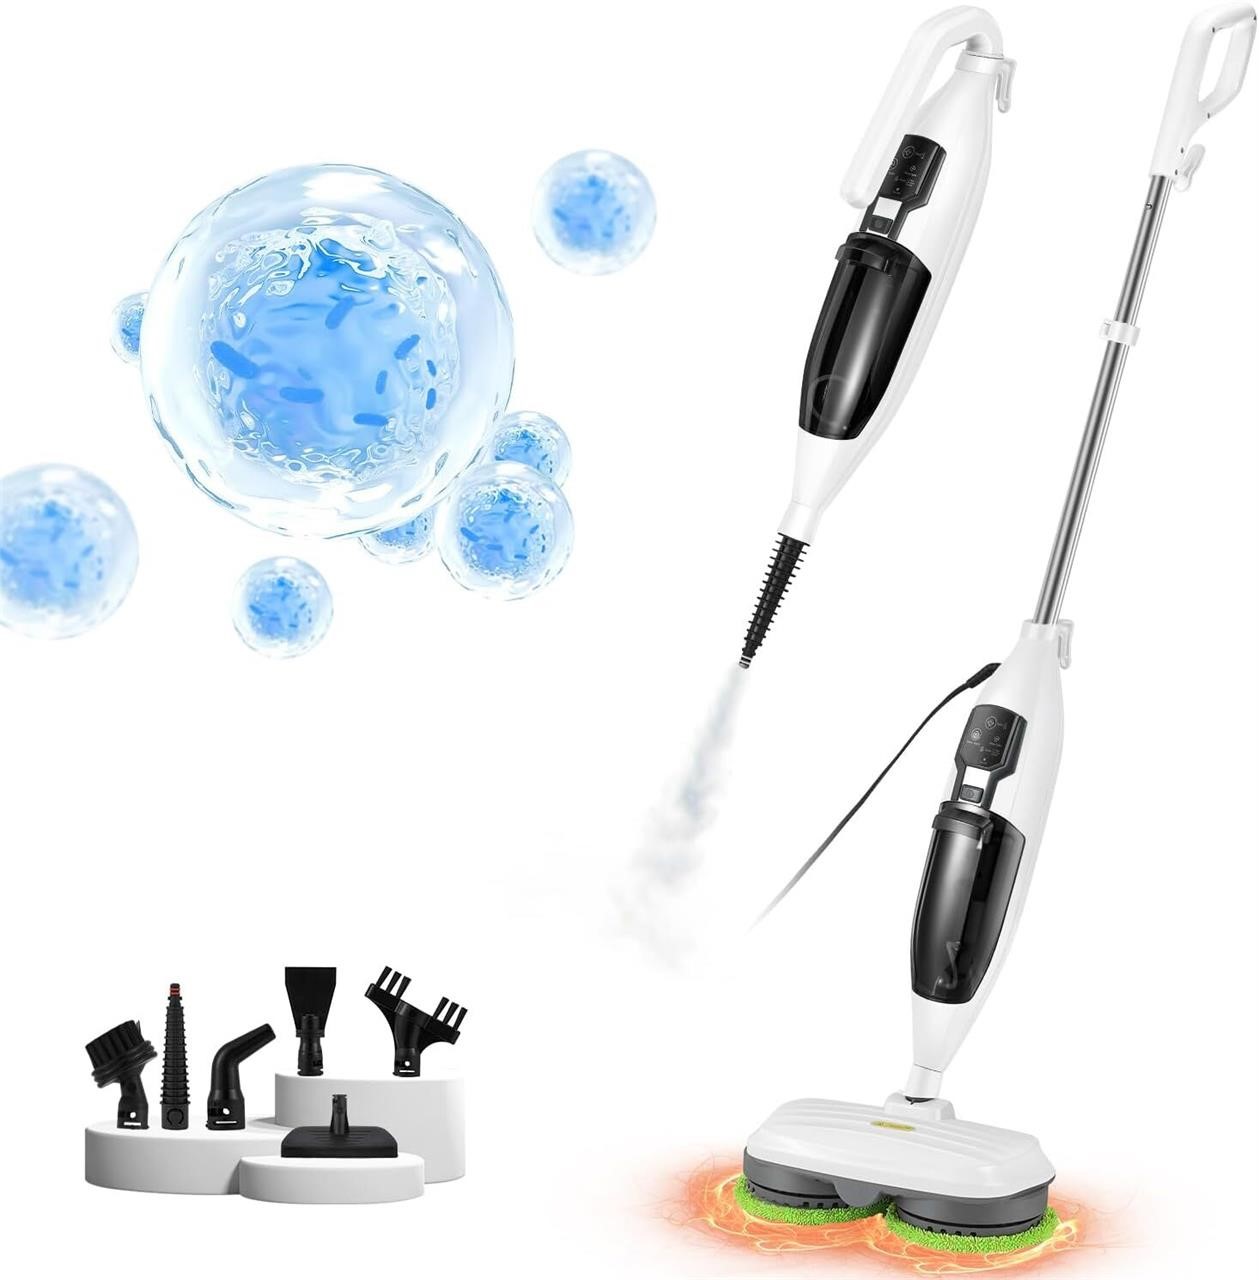 ```
15 in 1 Steam Spin Mop Cleaner
```